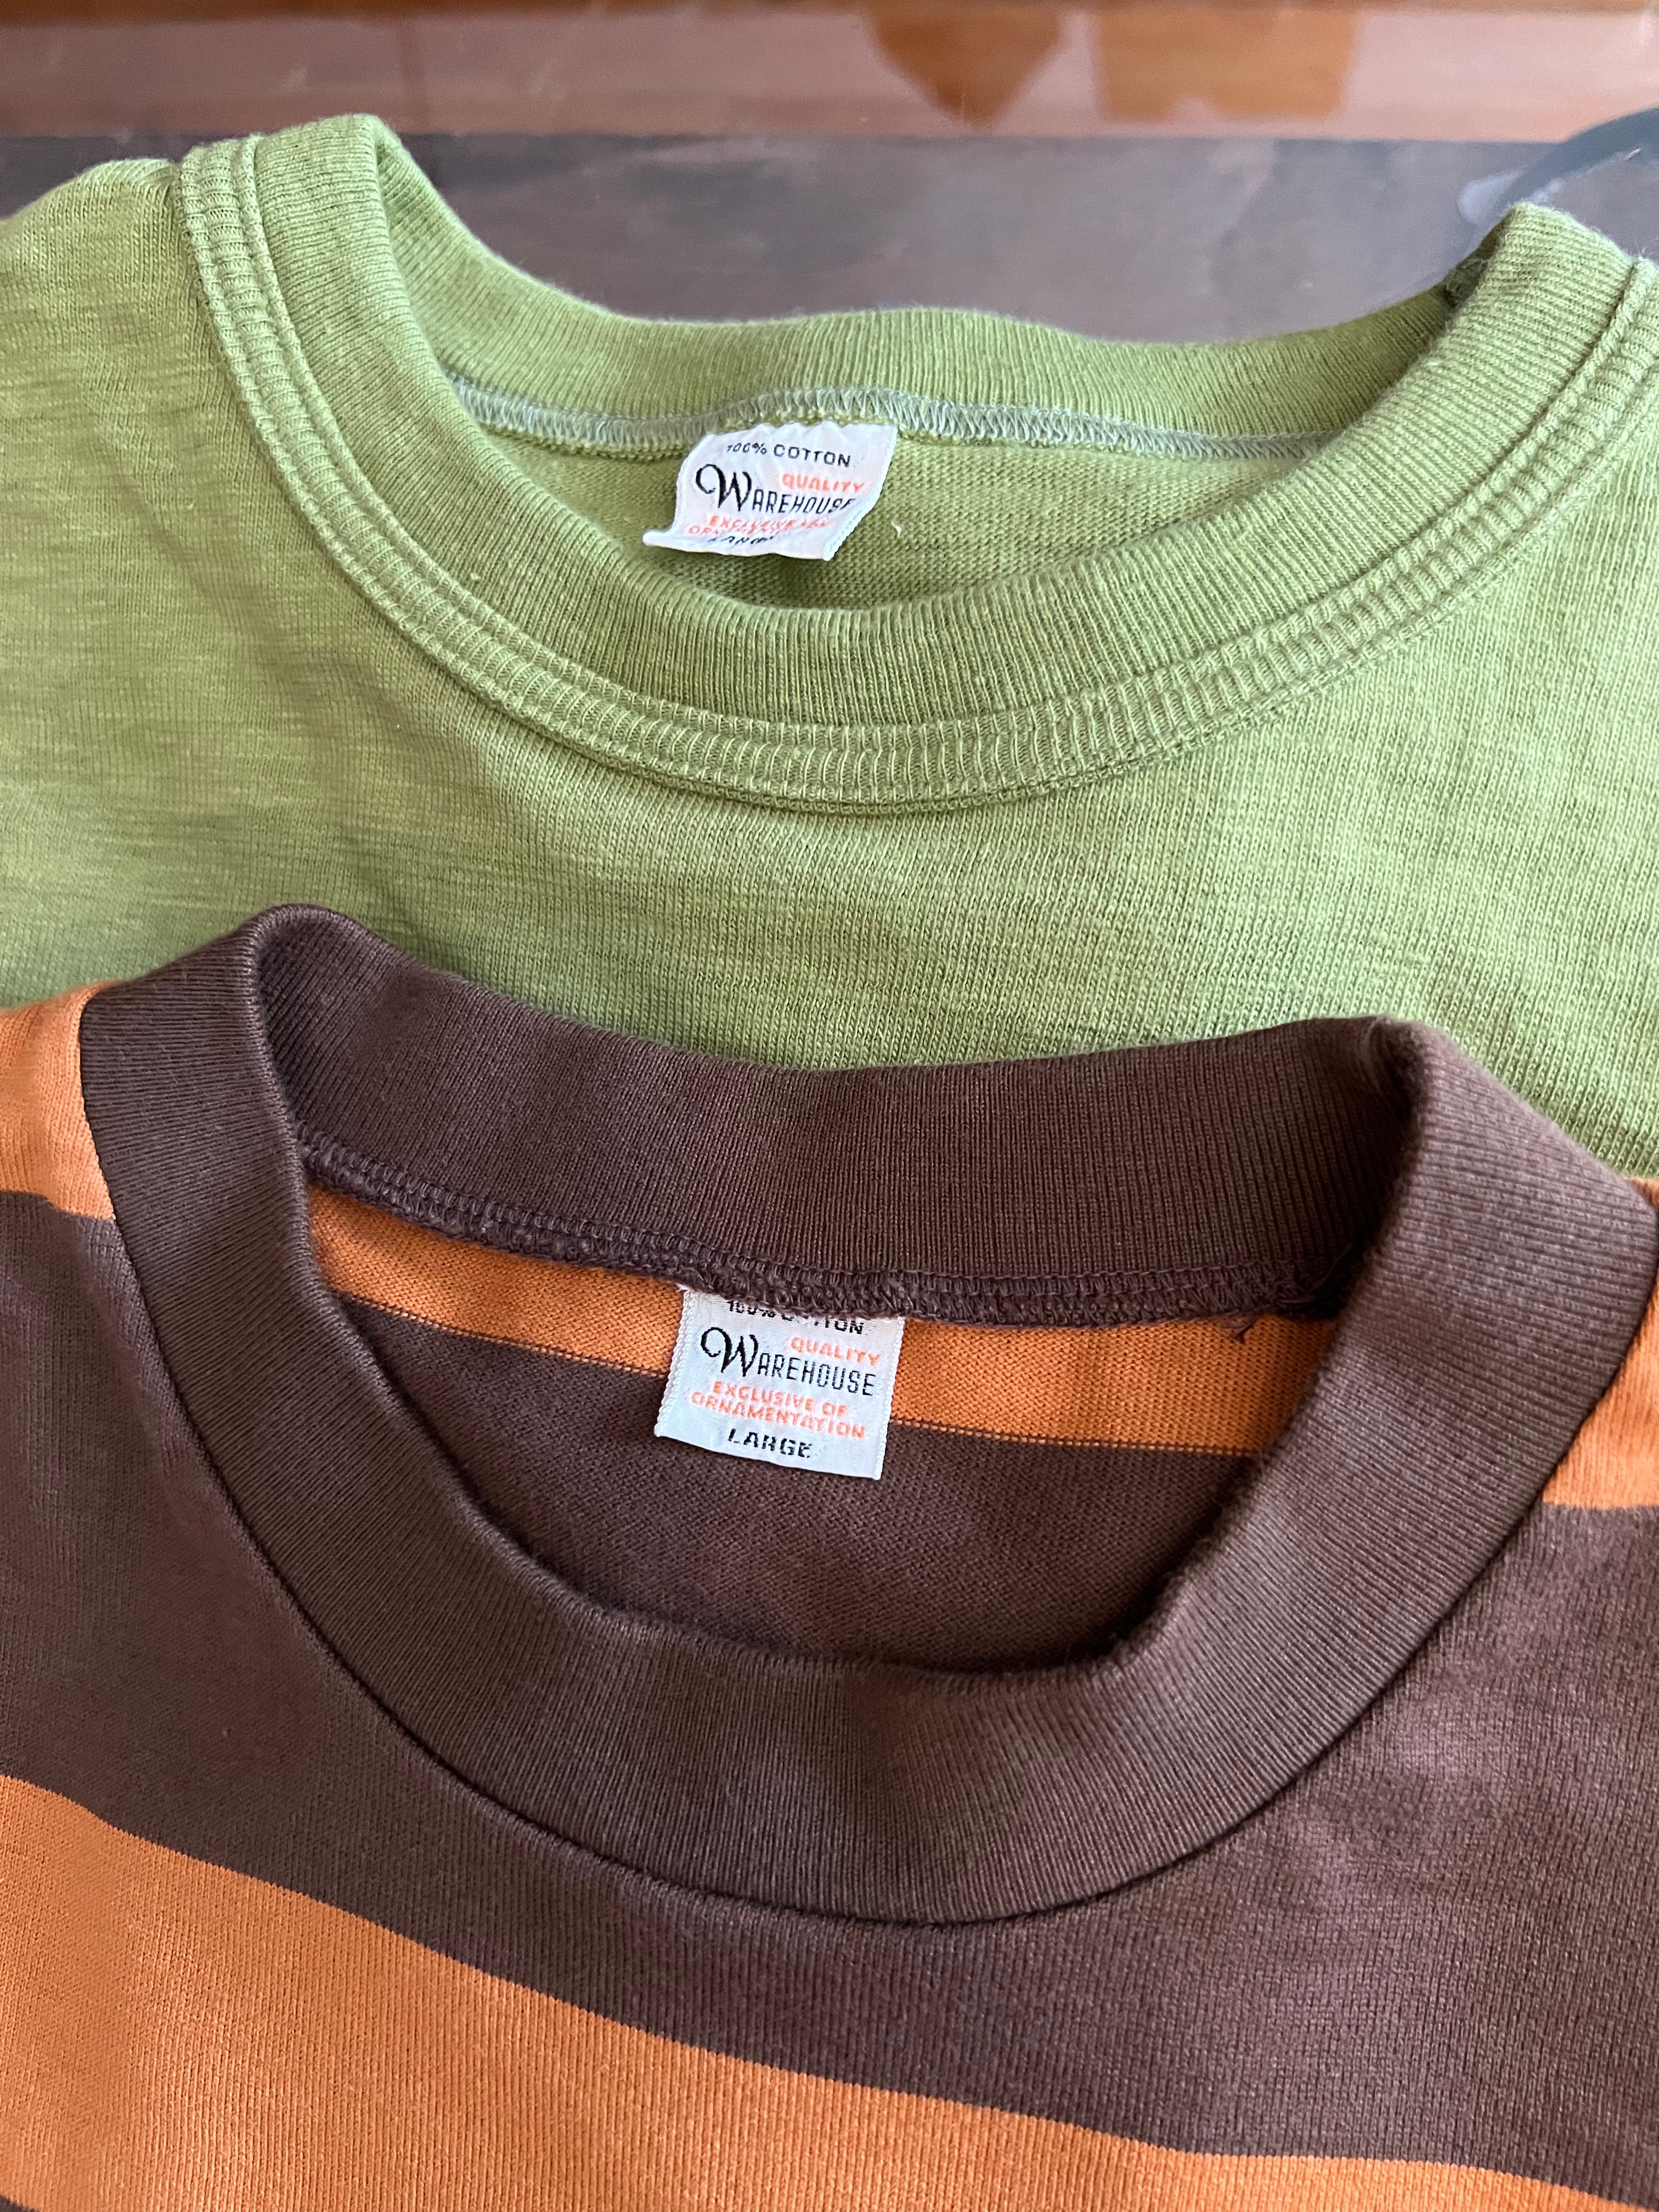 Gently Used Warehouse & Co. 2 Pack - Large - Orange/Brown & Green